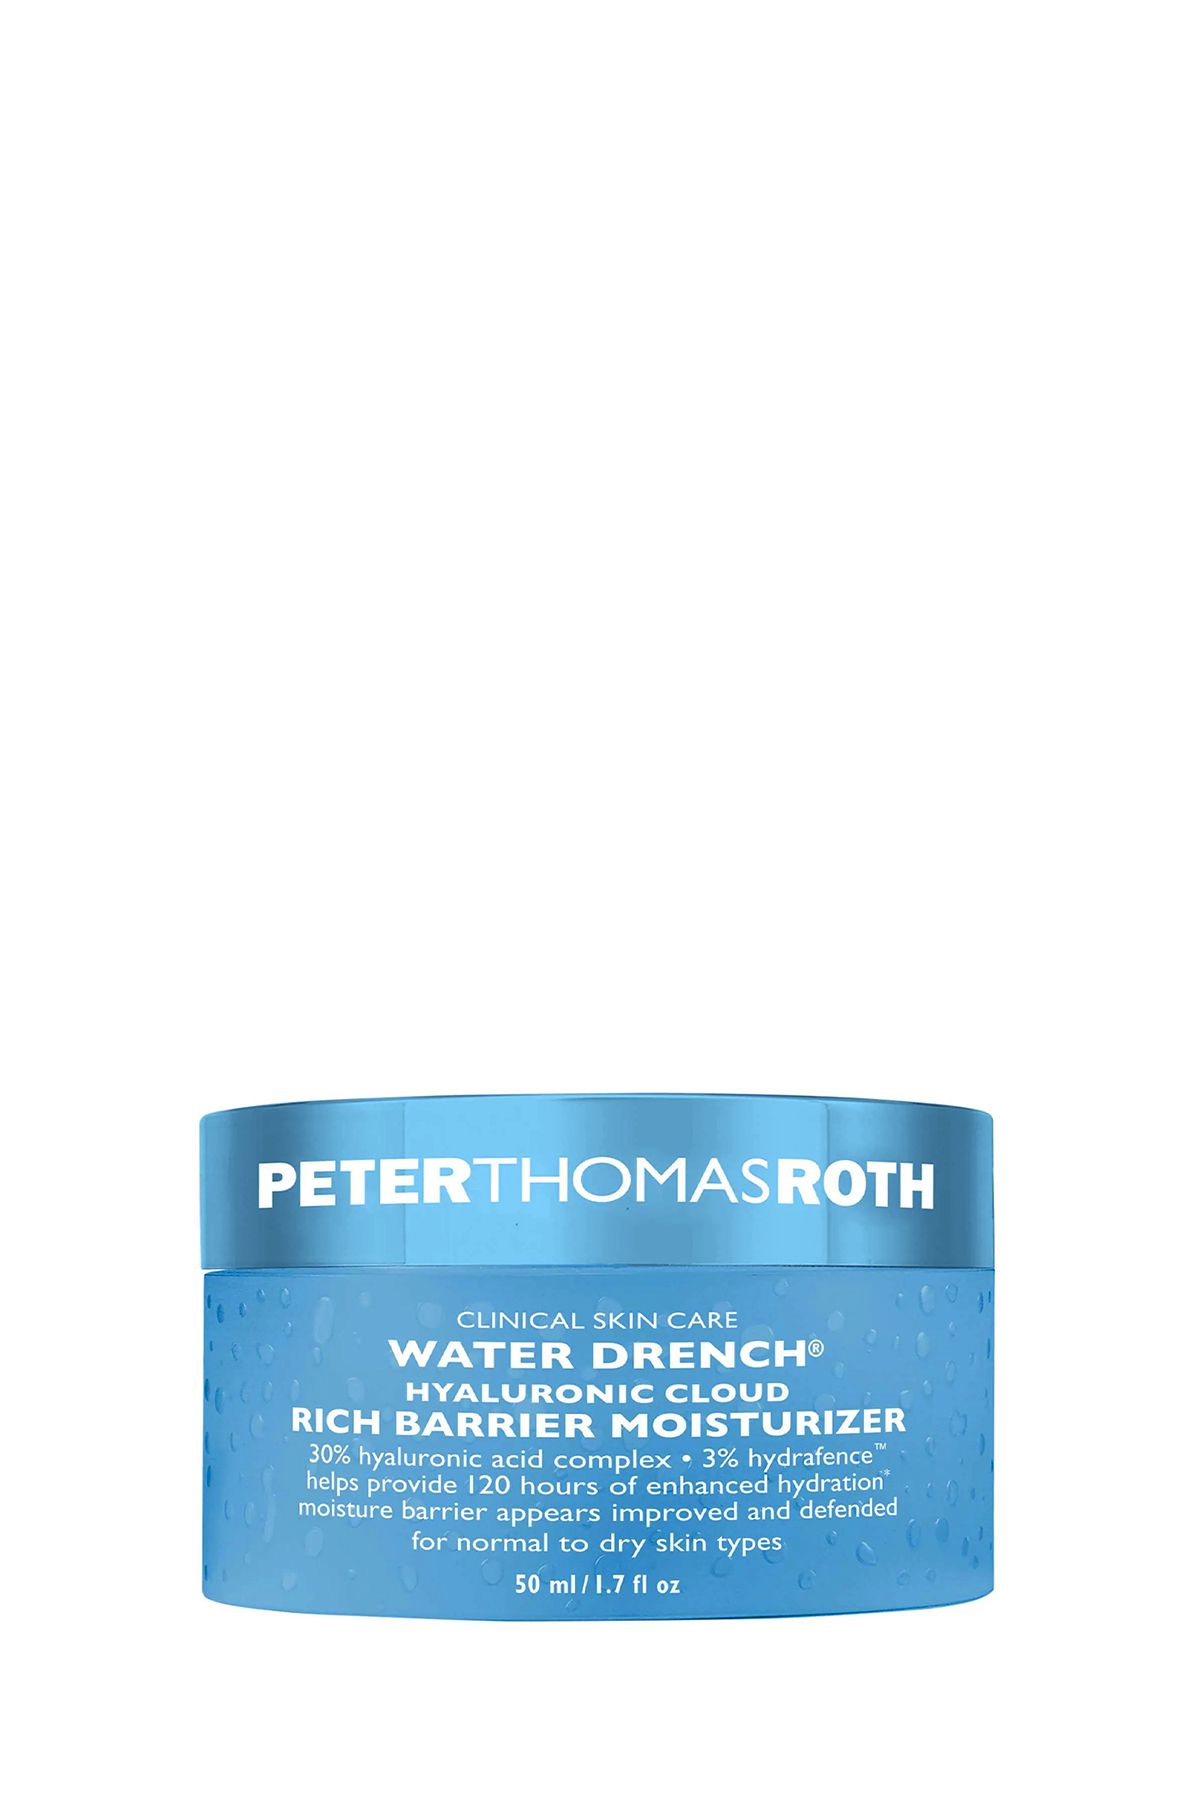 PETER THOMAS ROTH Water Drench Hyaluronic Cloud Rich Barrier Moisturizer 50 ml